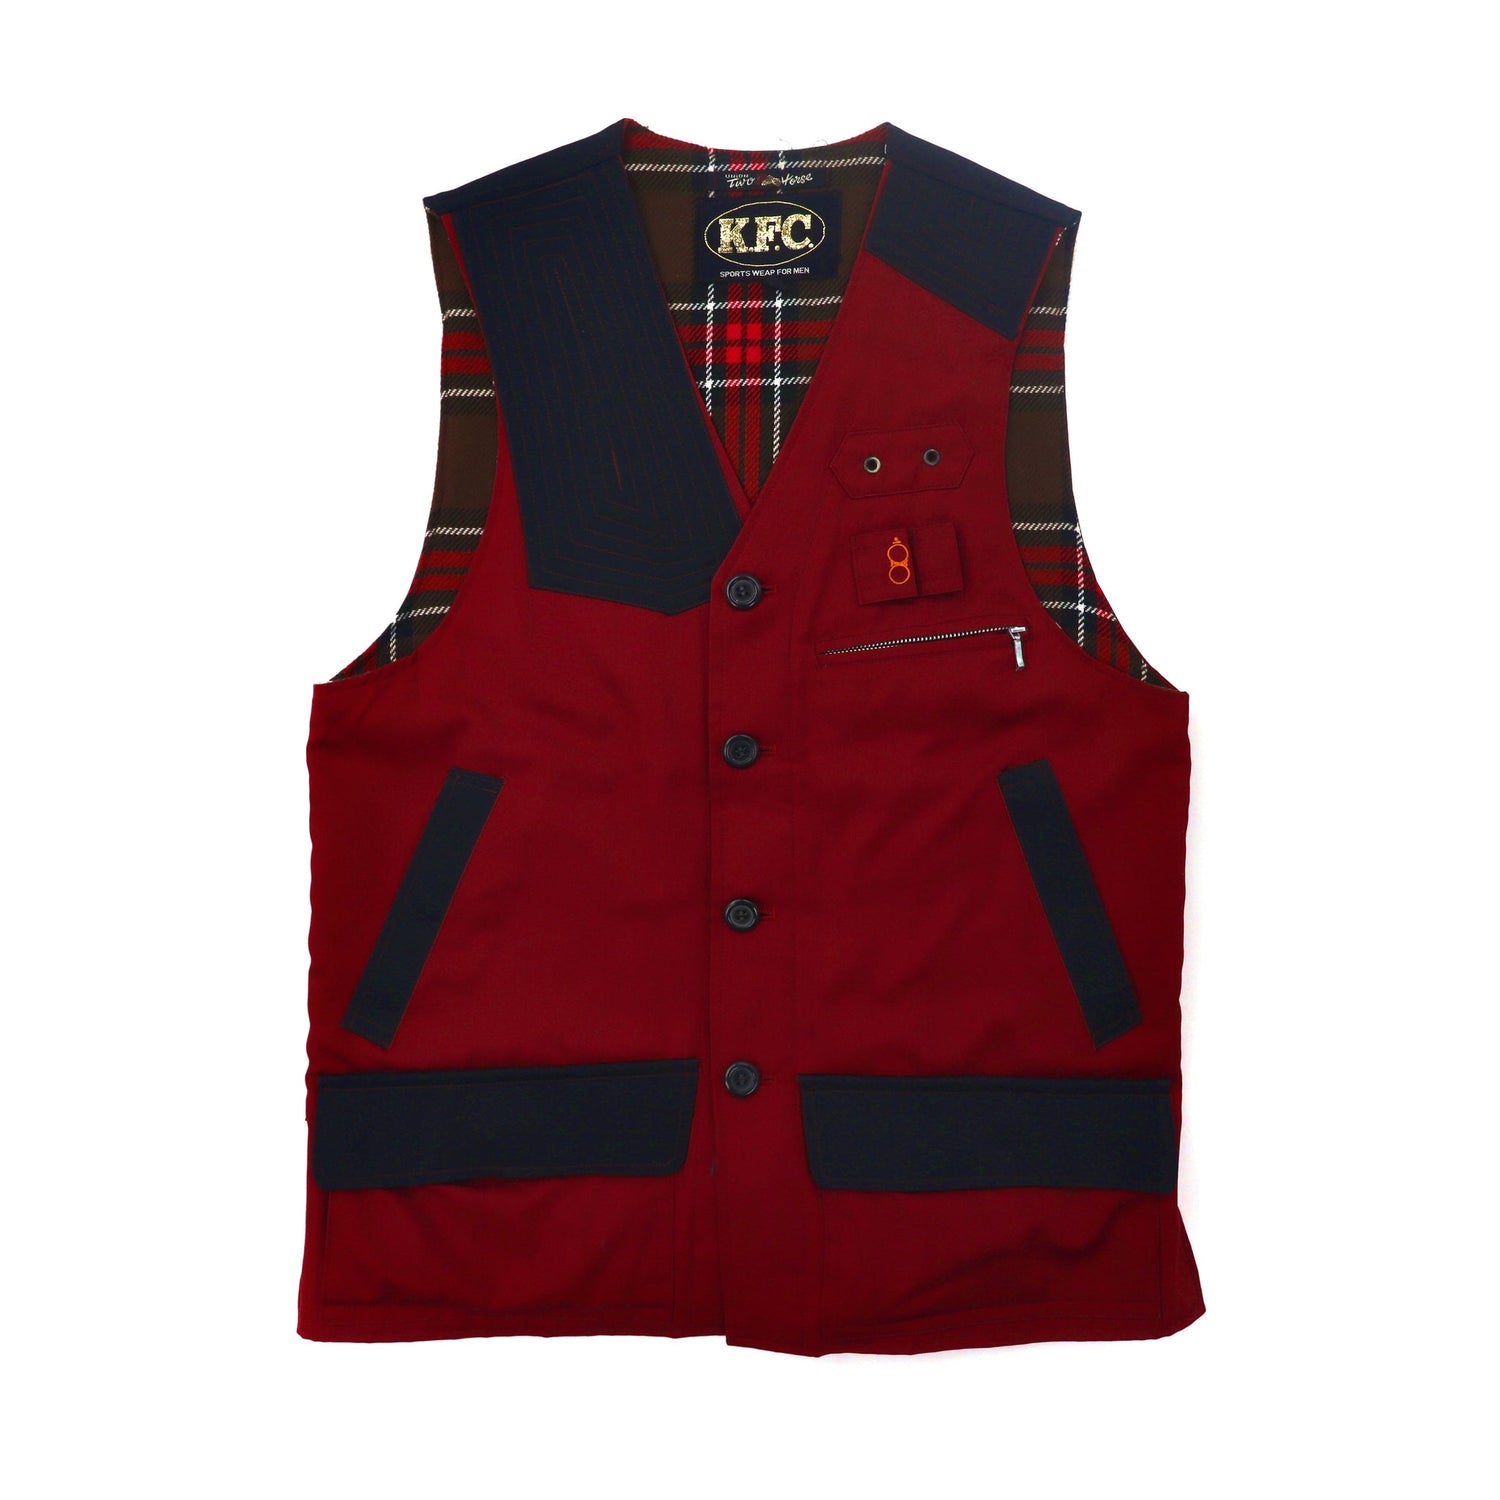 K.F.C. SPORTS WEAR Hunting Vest M BORDEAUX Lining Checked Union 